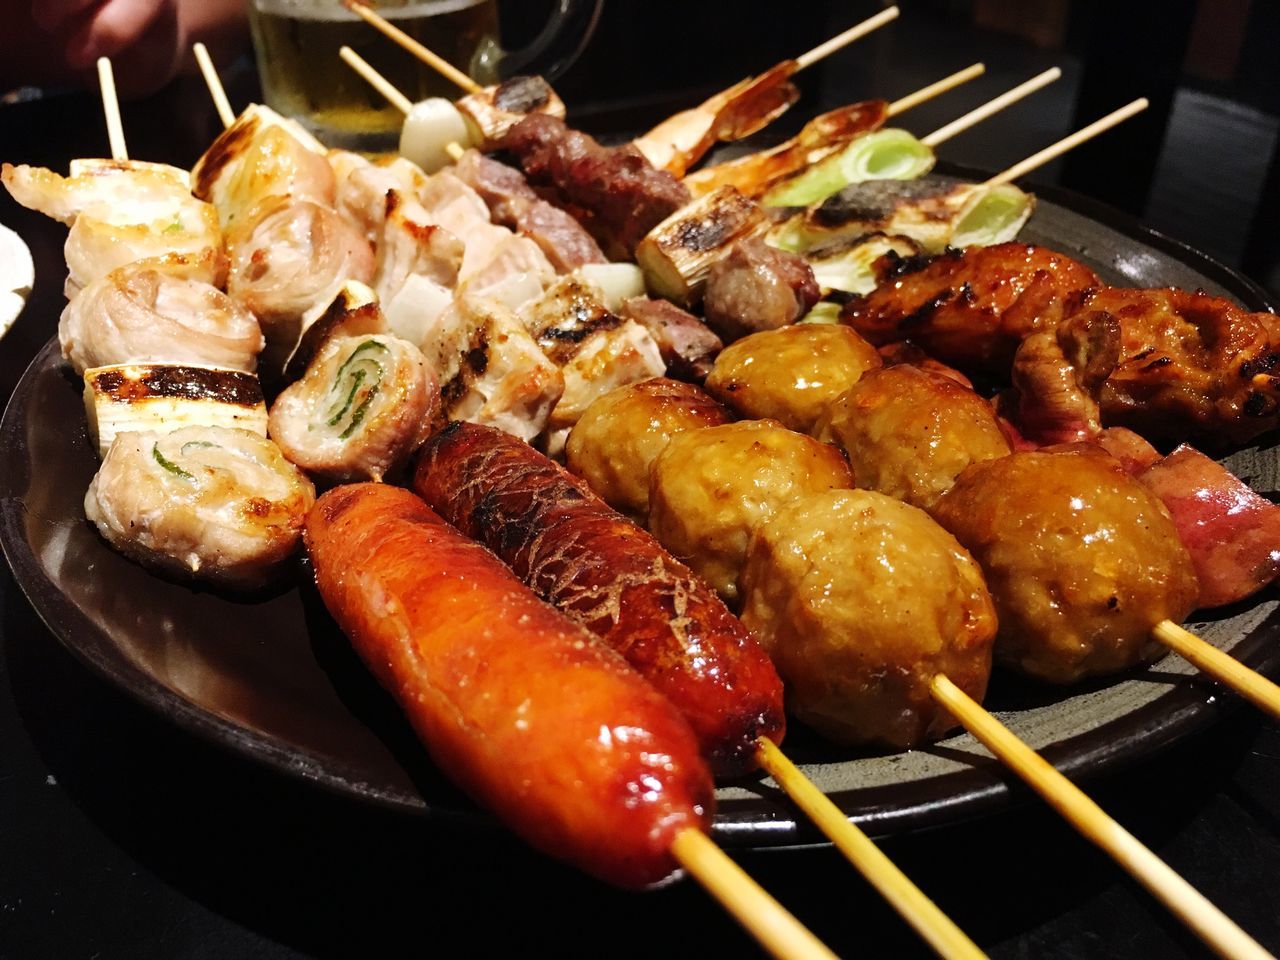 food and drink, food, freshness, healthy eating, seafood, grilled, no people, barbecue, indoors, ready-to-eat, close-up, skewer, serving tray, cultures, day